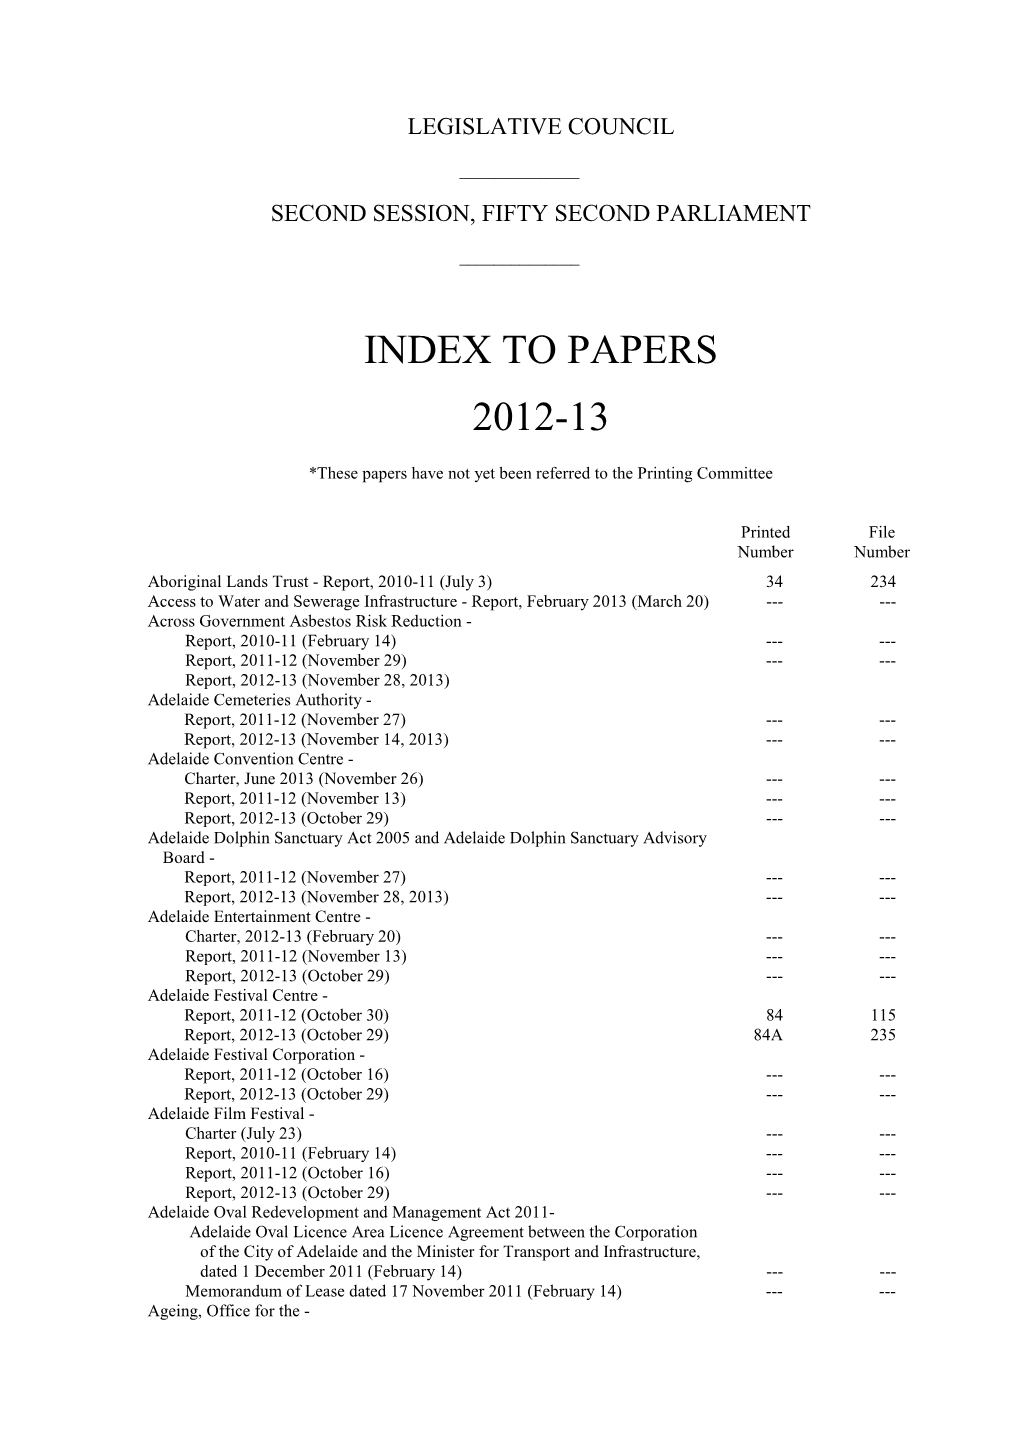 To Papers 2012-13